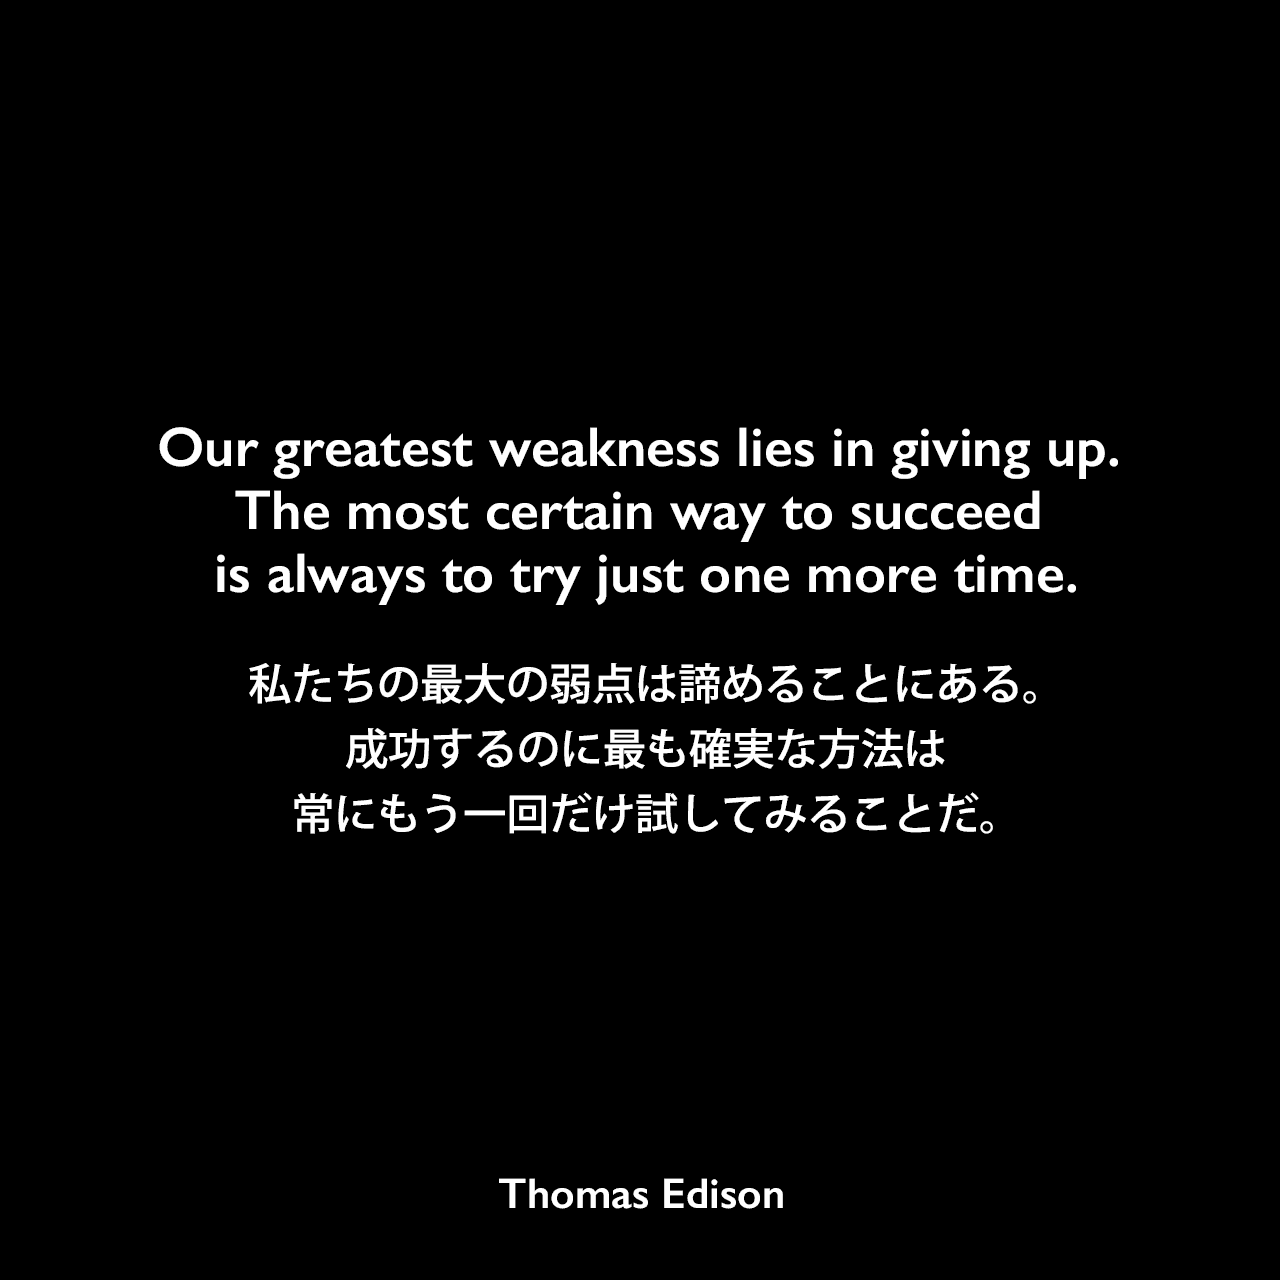 Our greatest weakness lies in giving up. The most certain way to succeed is always to try just one more time.私たちの最大の弱点は諦めることにある。成功するのに最も確実な方法は、常にもう一回だけ試してみることだ。- 「Edison & Ford Quote Book」にエジソンの言葉として記載Thomas Edison